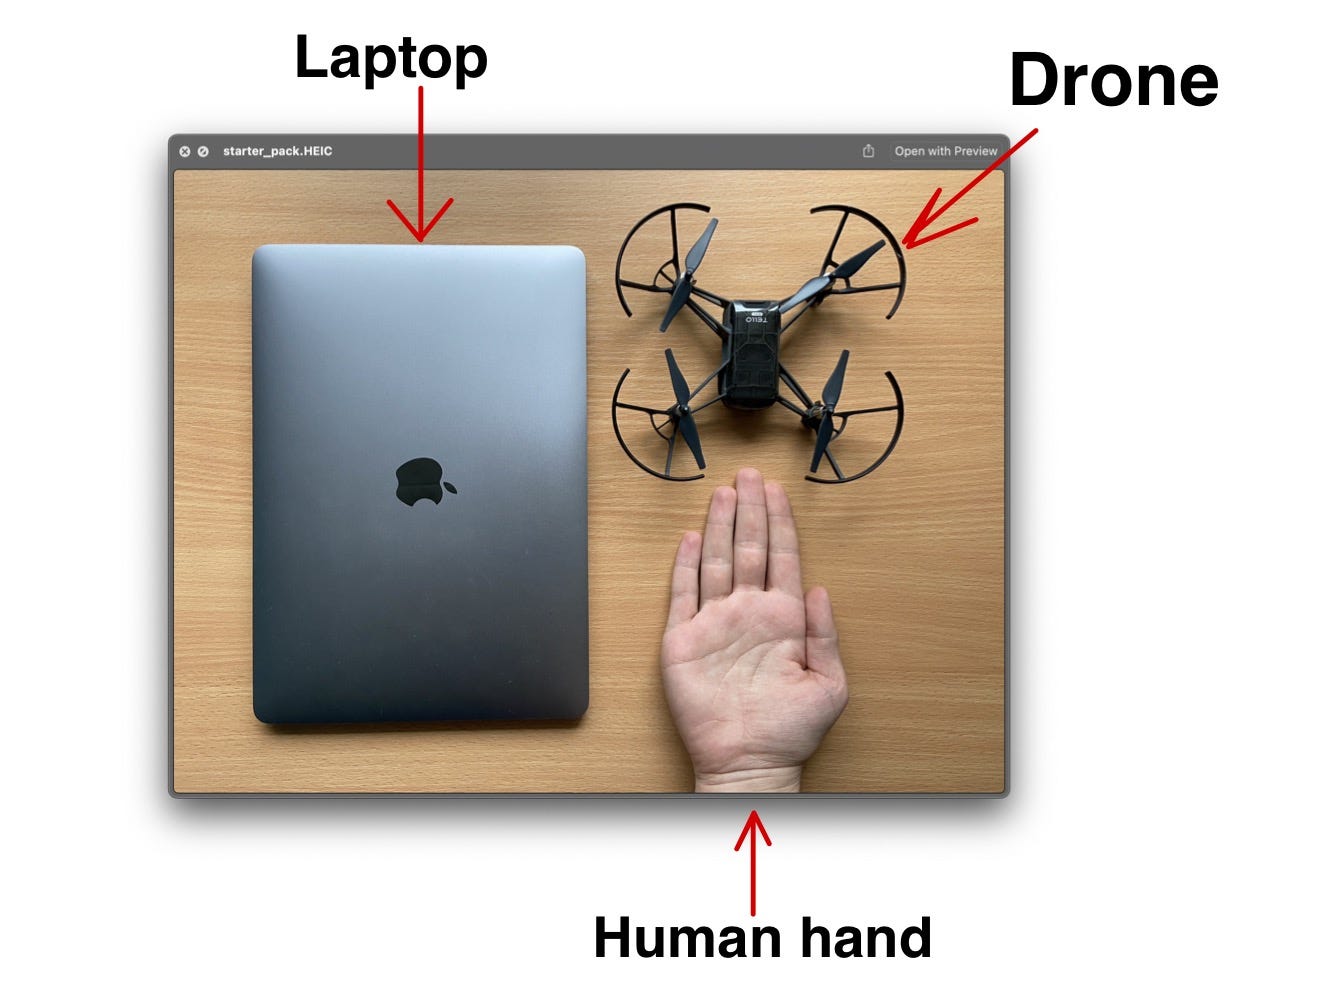 Control DJI Tello drone with Hand gestures, by Nikita Kiselov